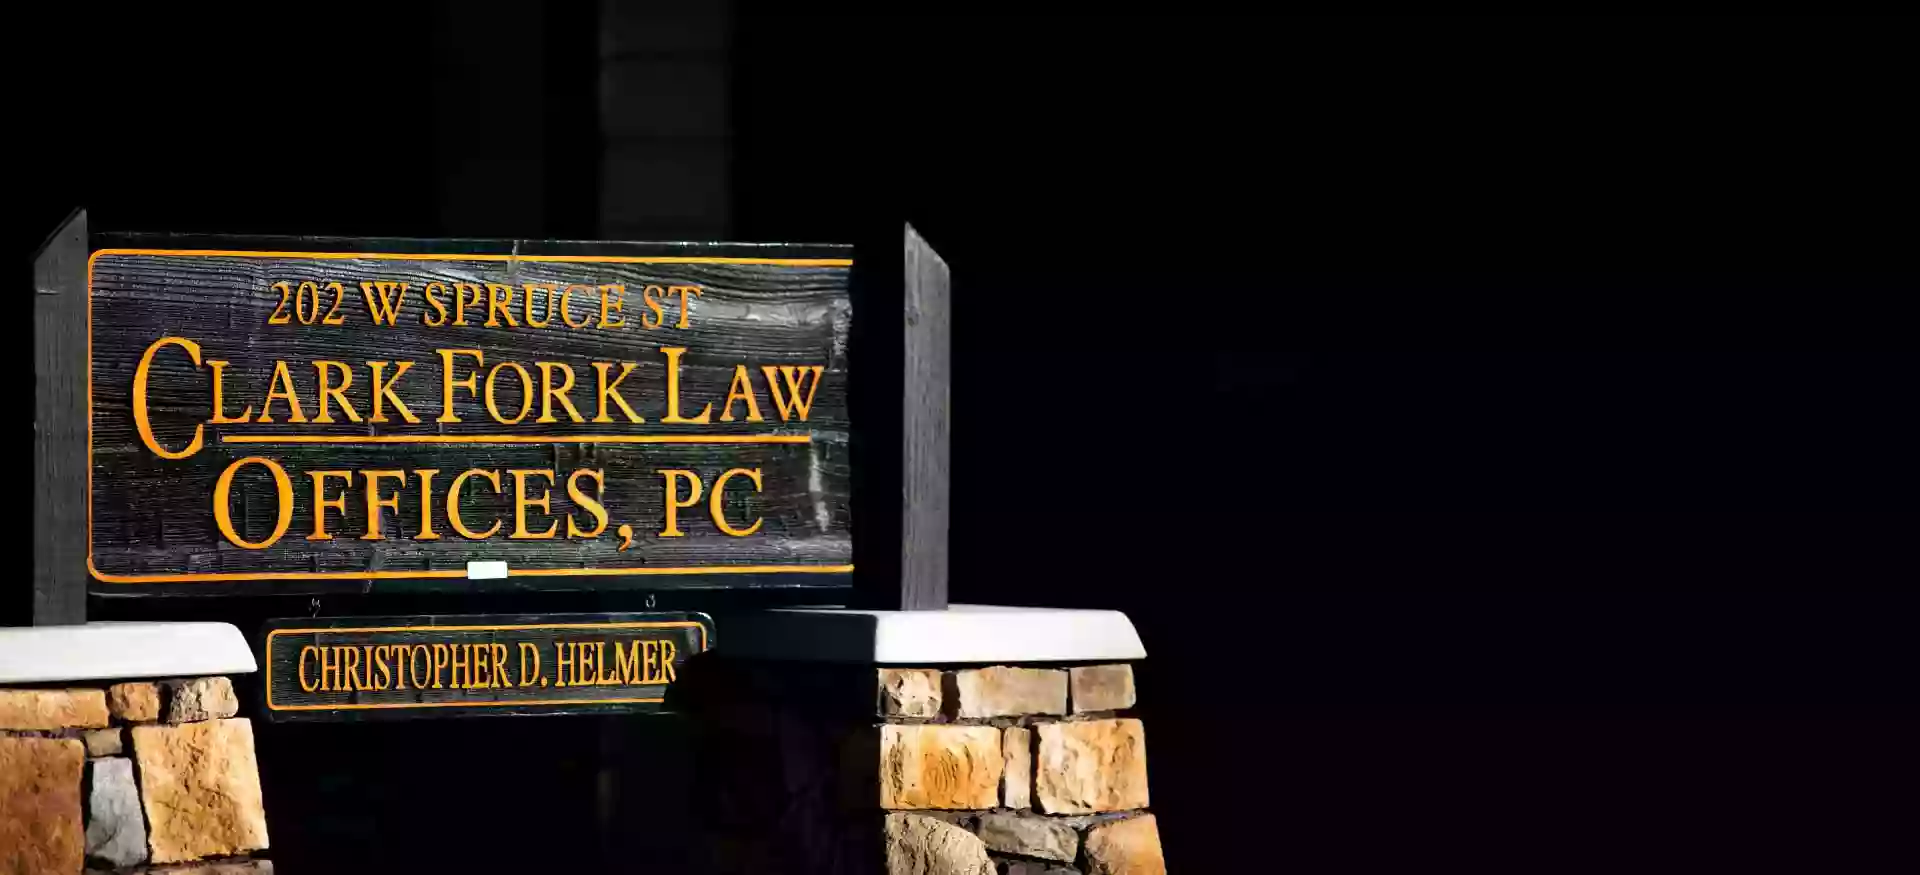 Clark Fork Law Offices, PC